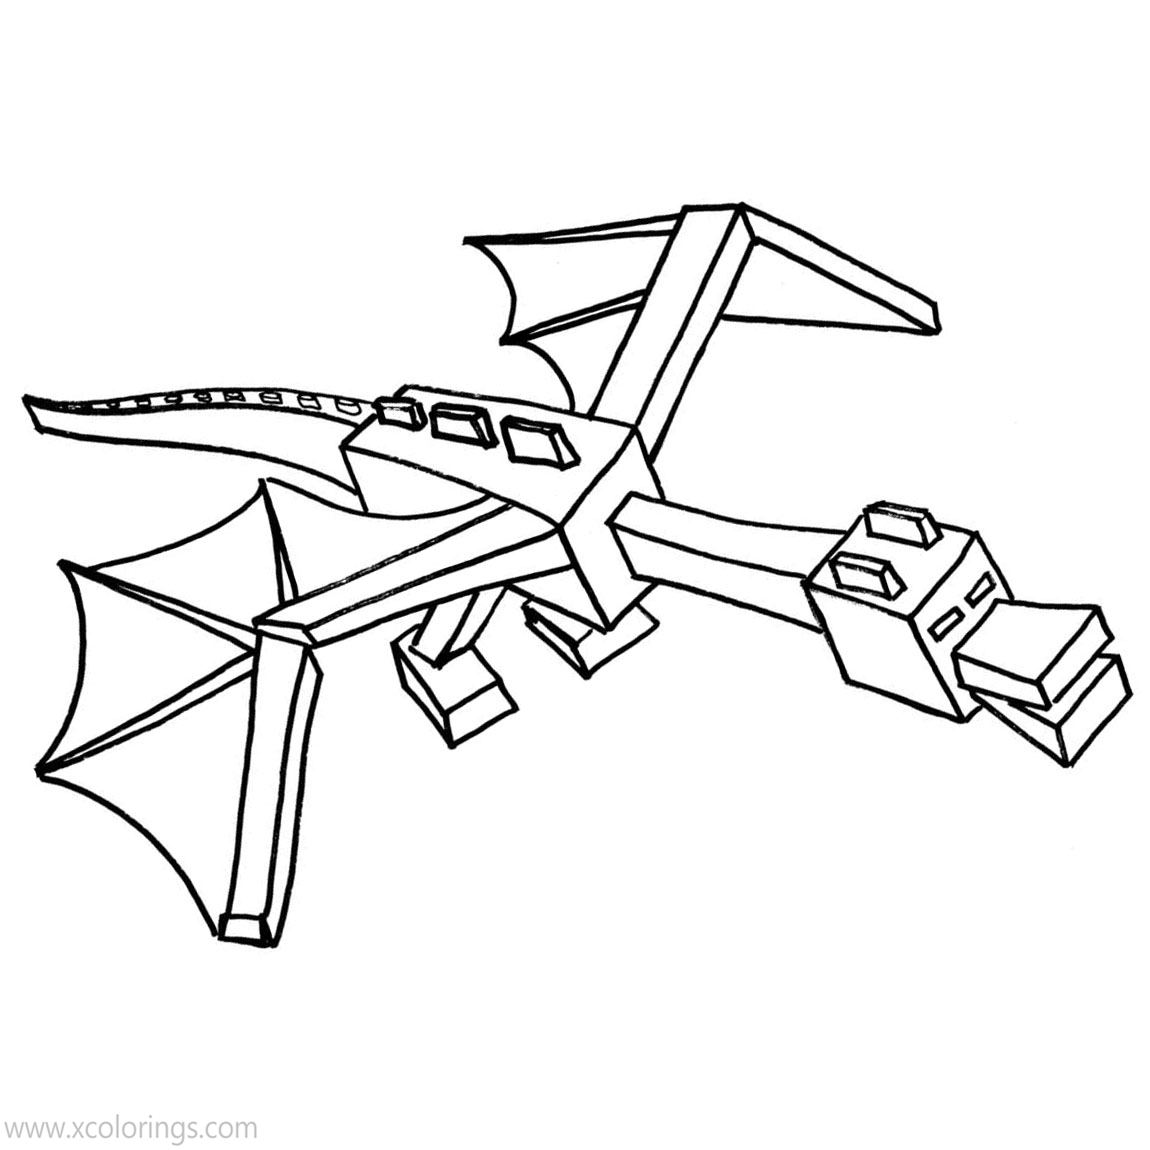 minecraft ender dragon colour in minecraft ender dragon coloring page